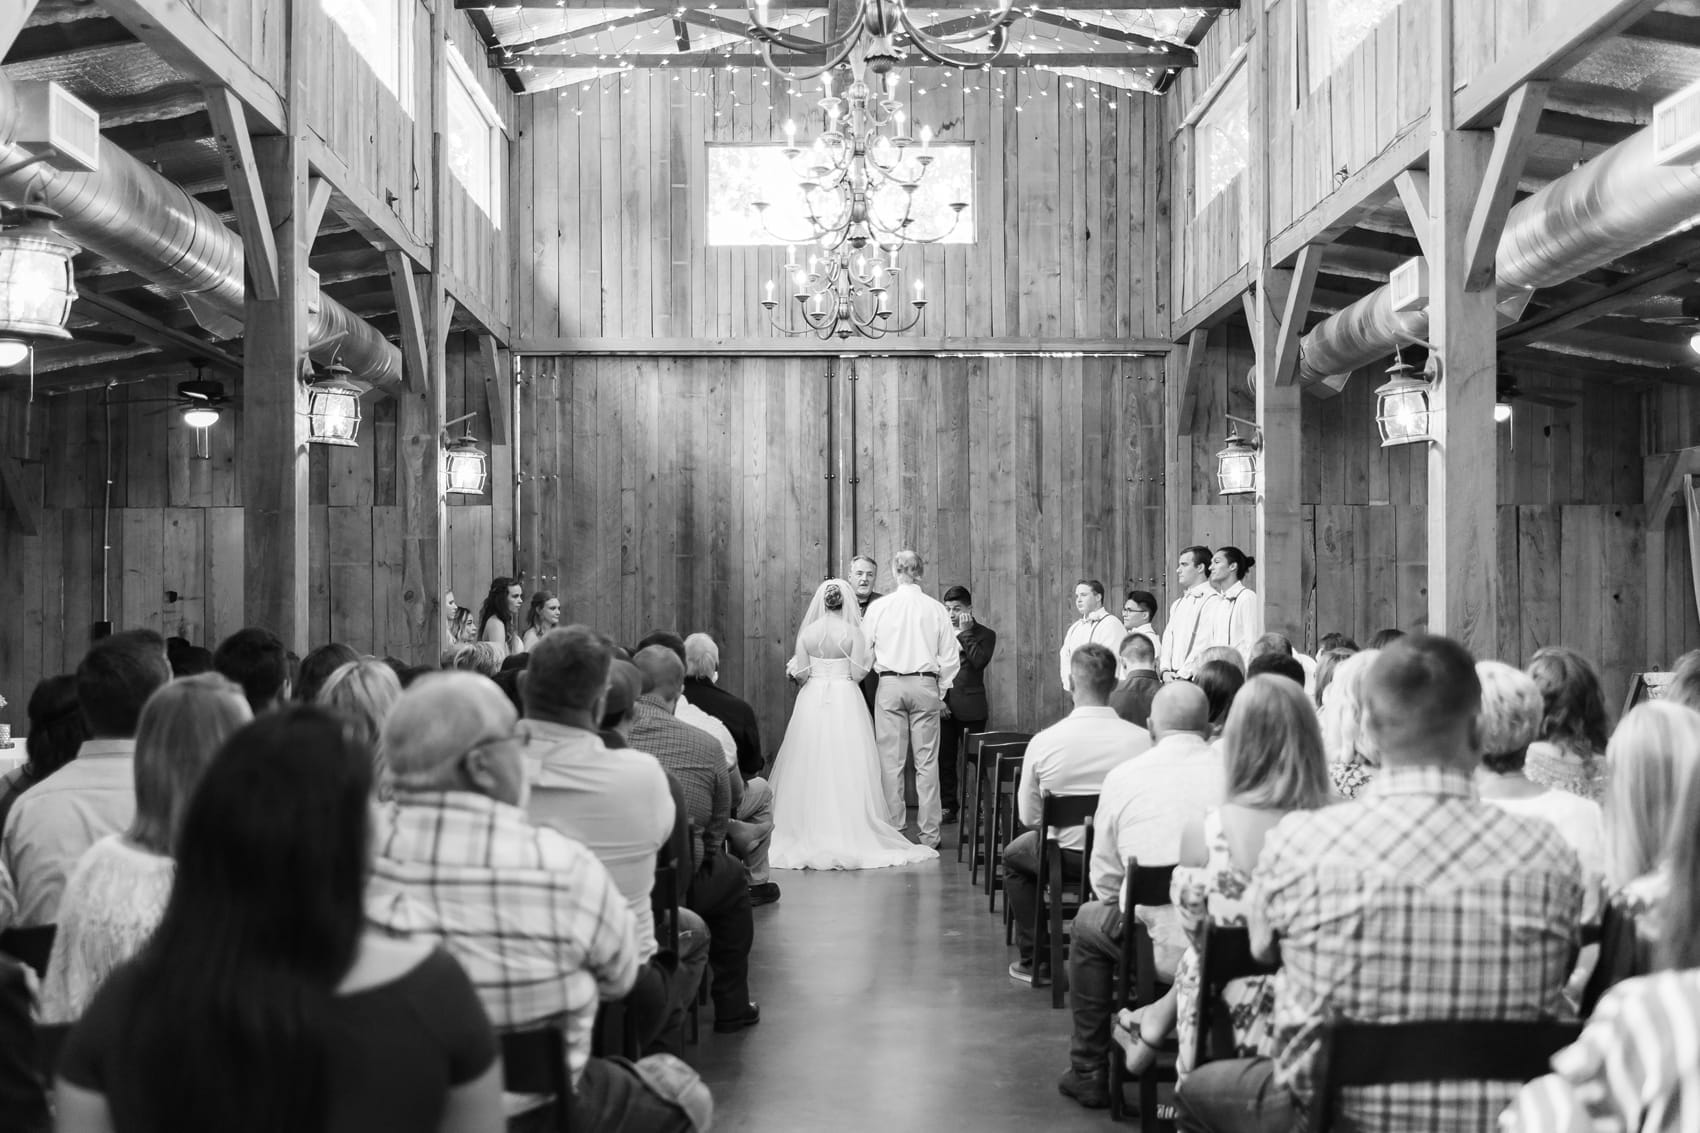 Bride and groom at a barn wedding in east texas